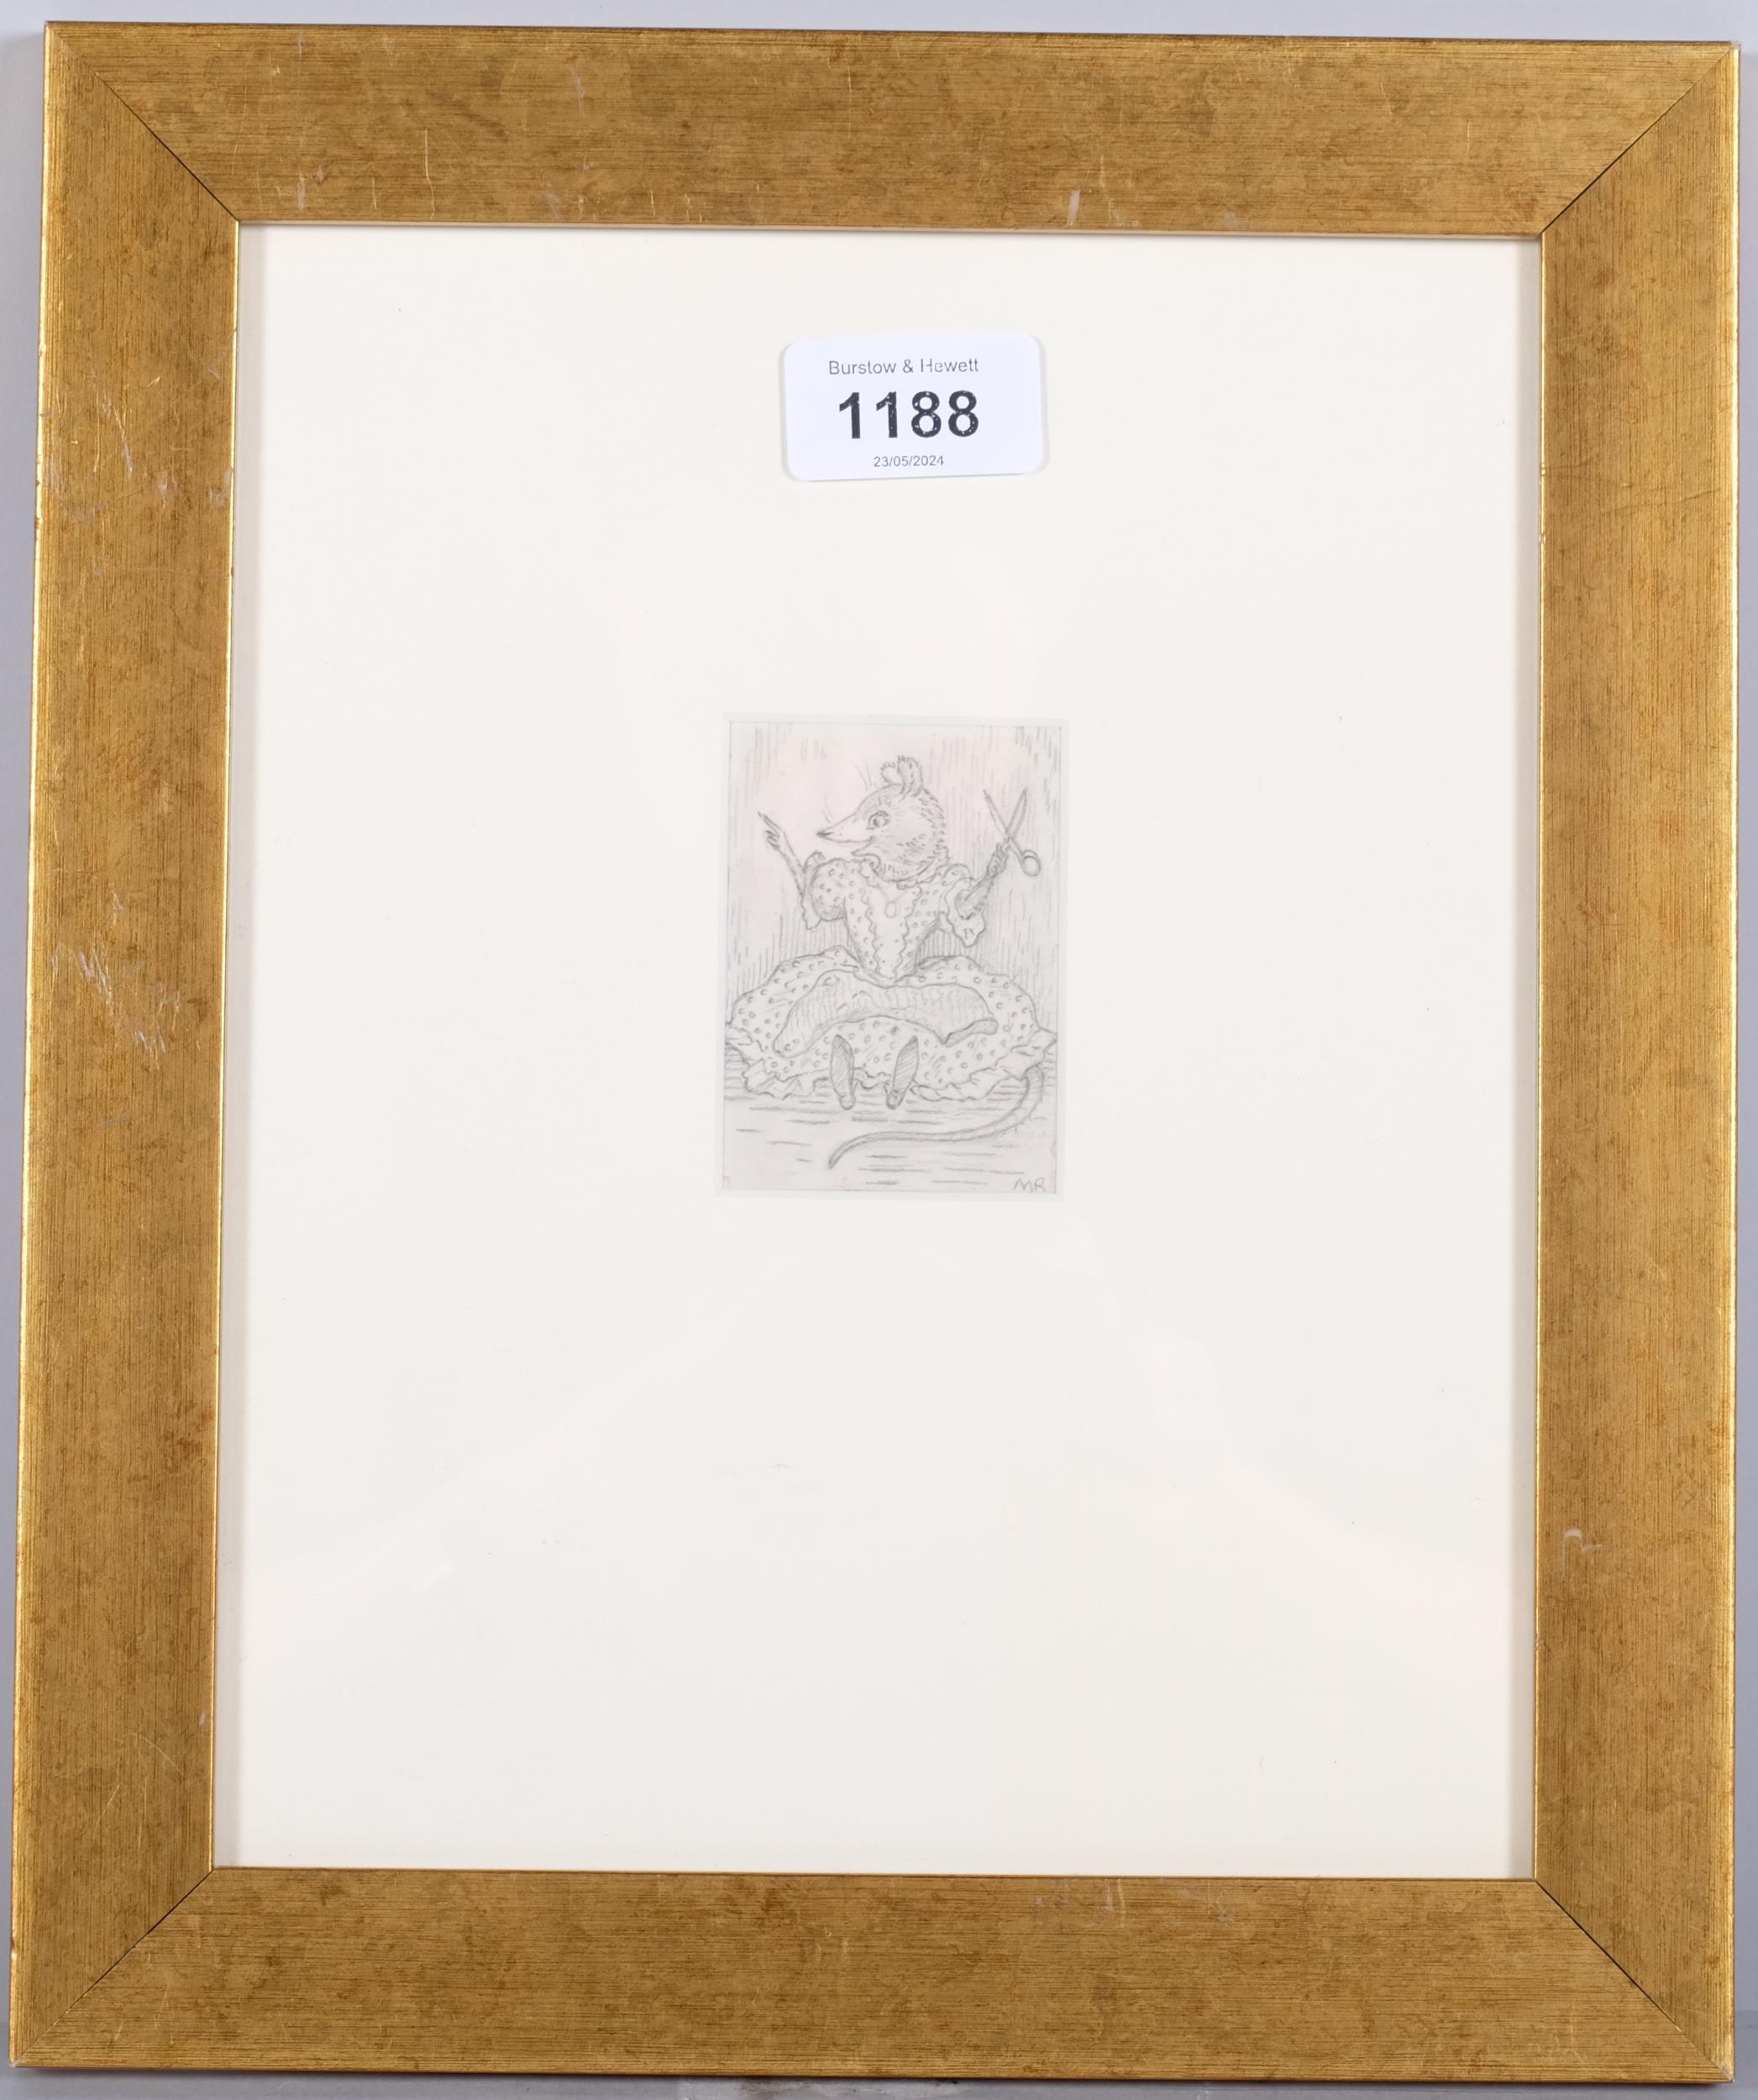 Margaret Ross, (act. 1930-50) pencil on paper, Mrs. Mouse, initialled lower right, 7cm x 5 m, - Image 2 of 4